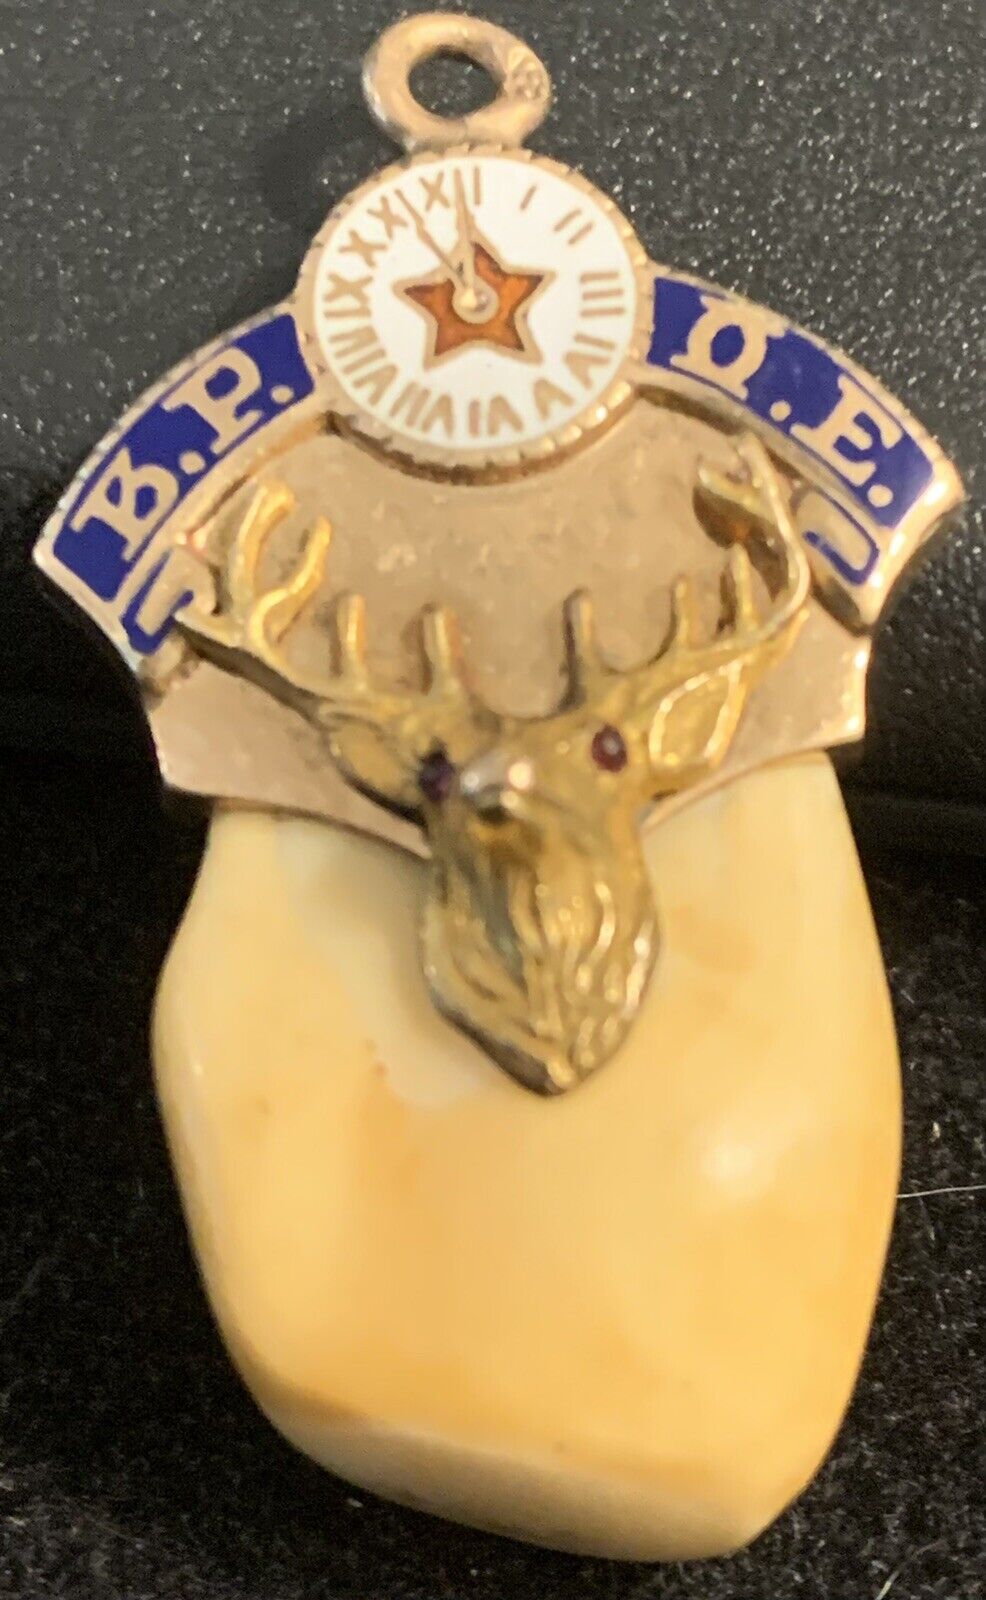 Antique Elks Club B.P.O.E. Tooth Fob / Pendant - Beautiful Old Collectible